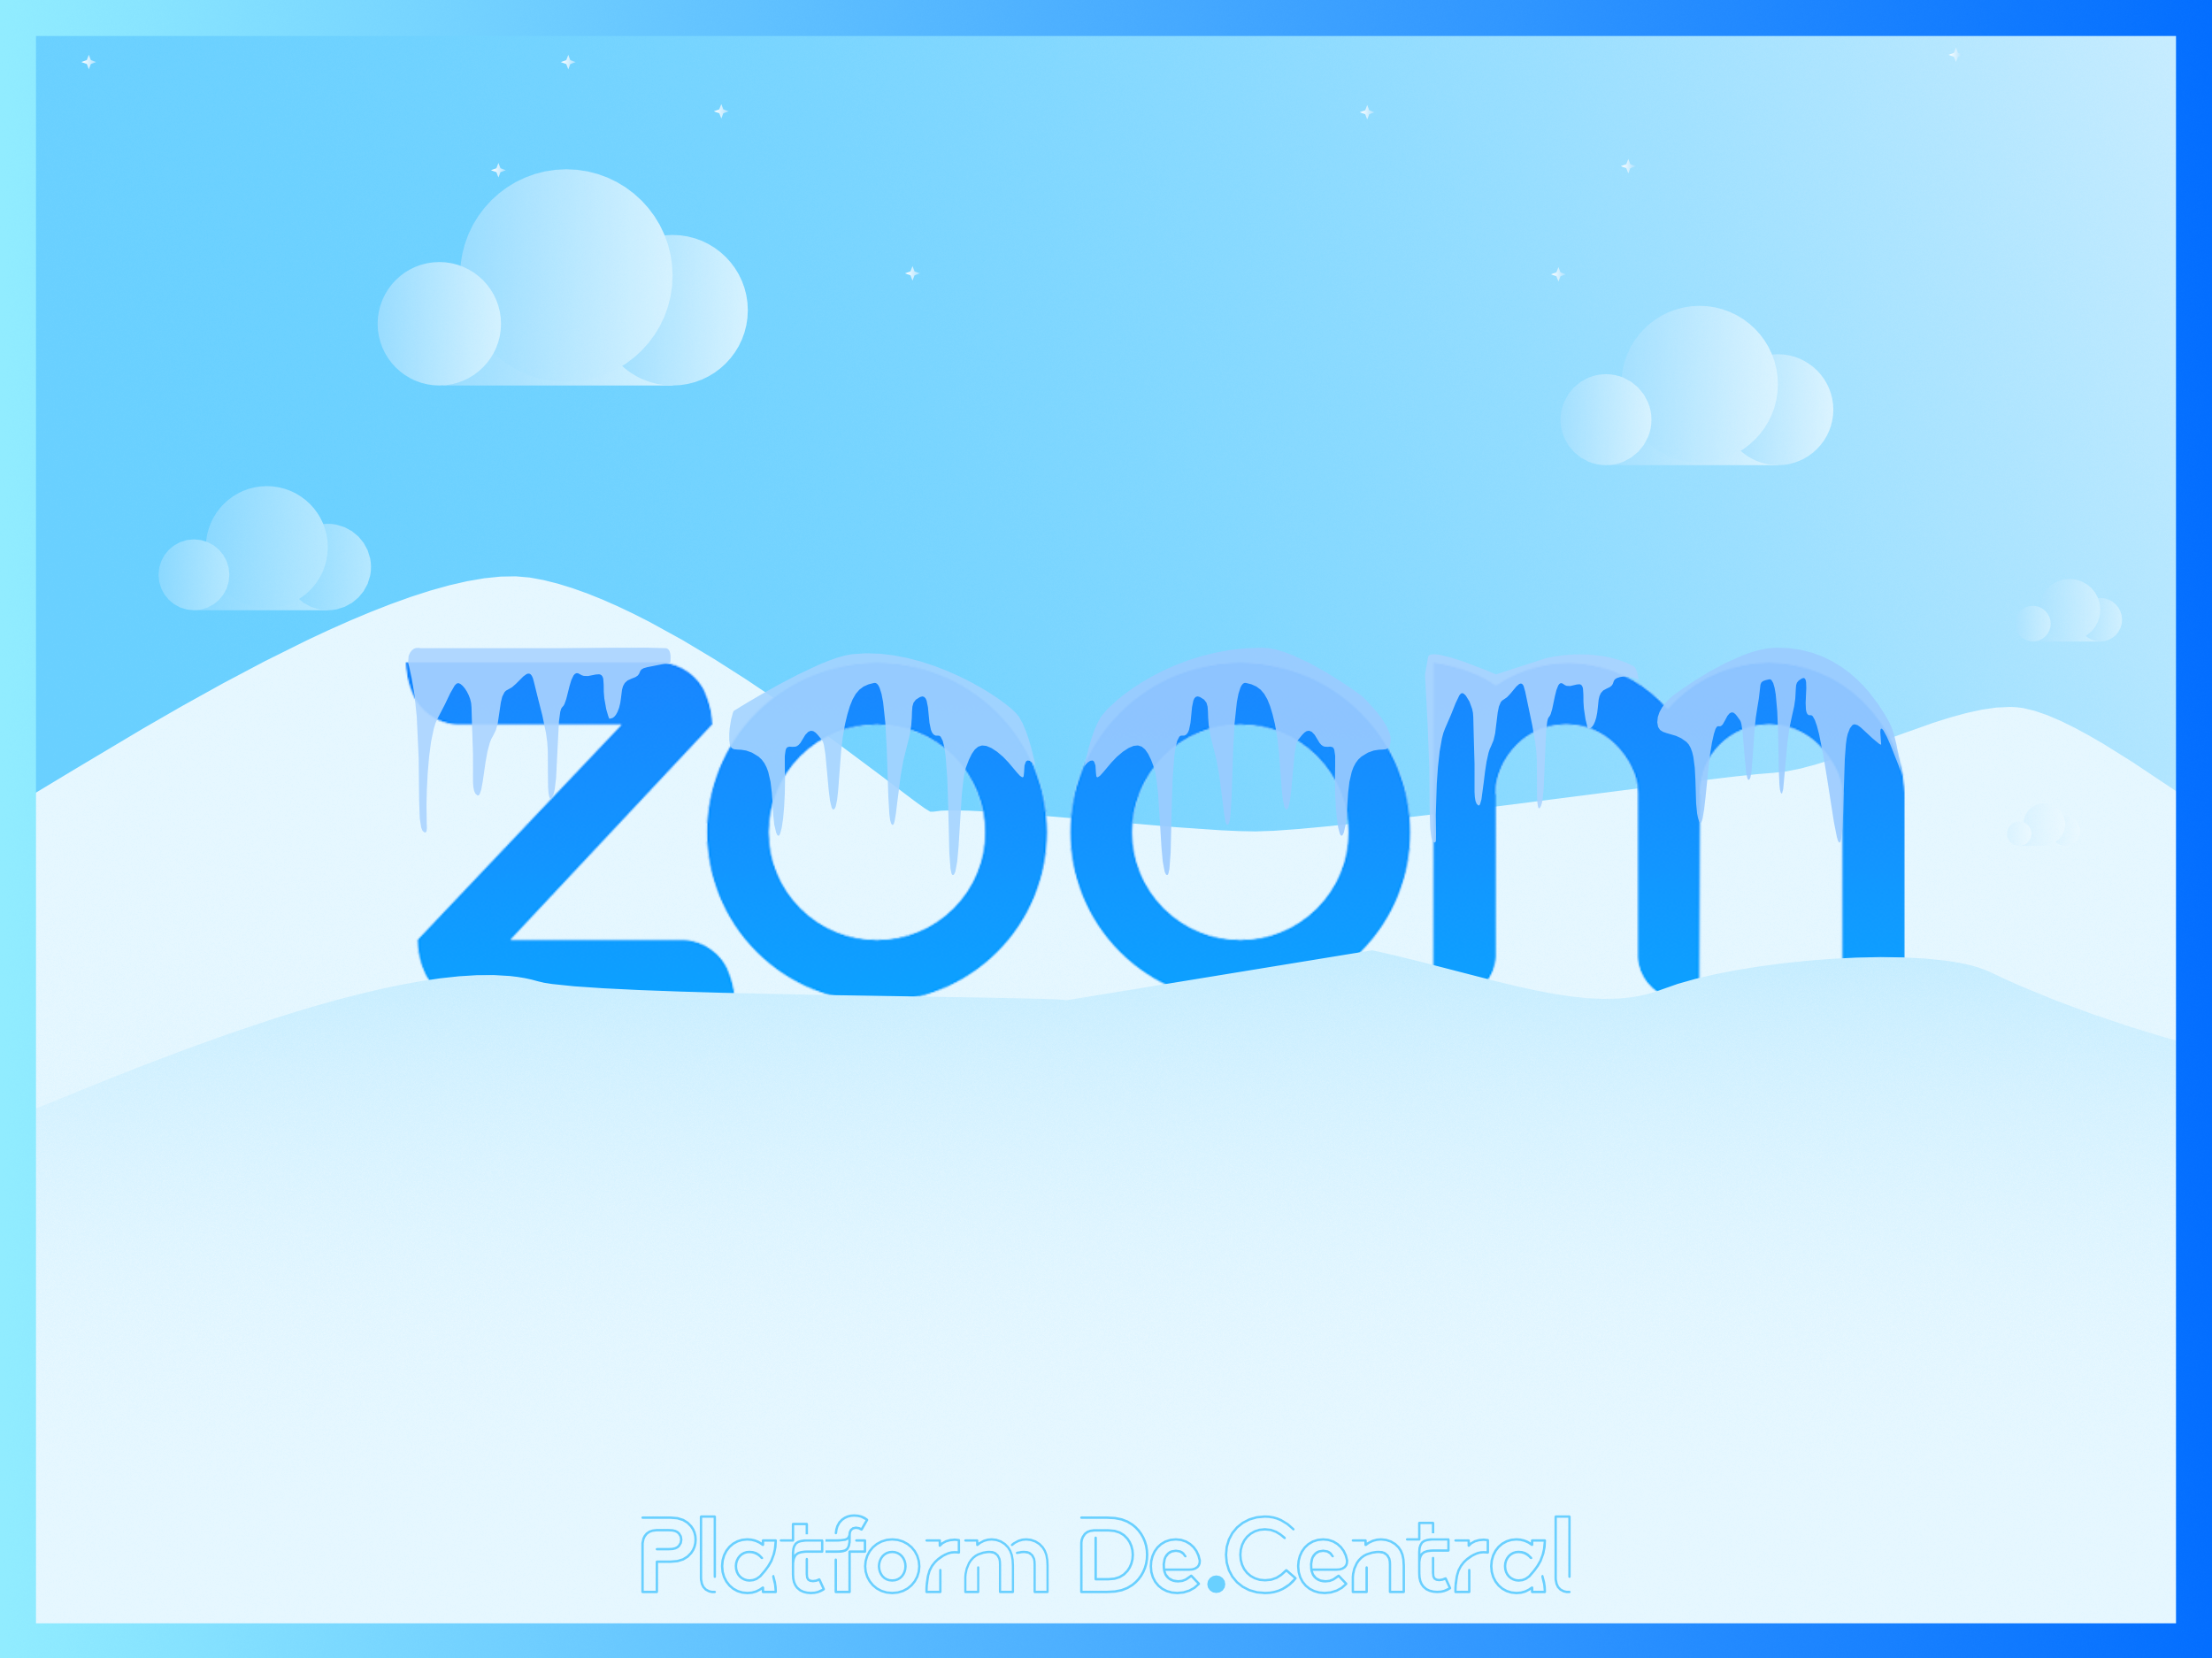 Zoom new features will be frozen for 90-days